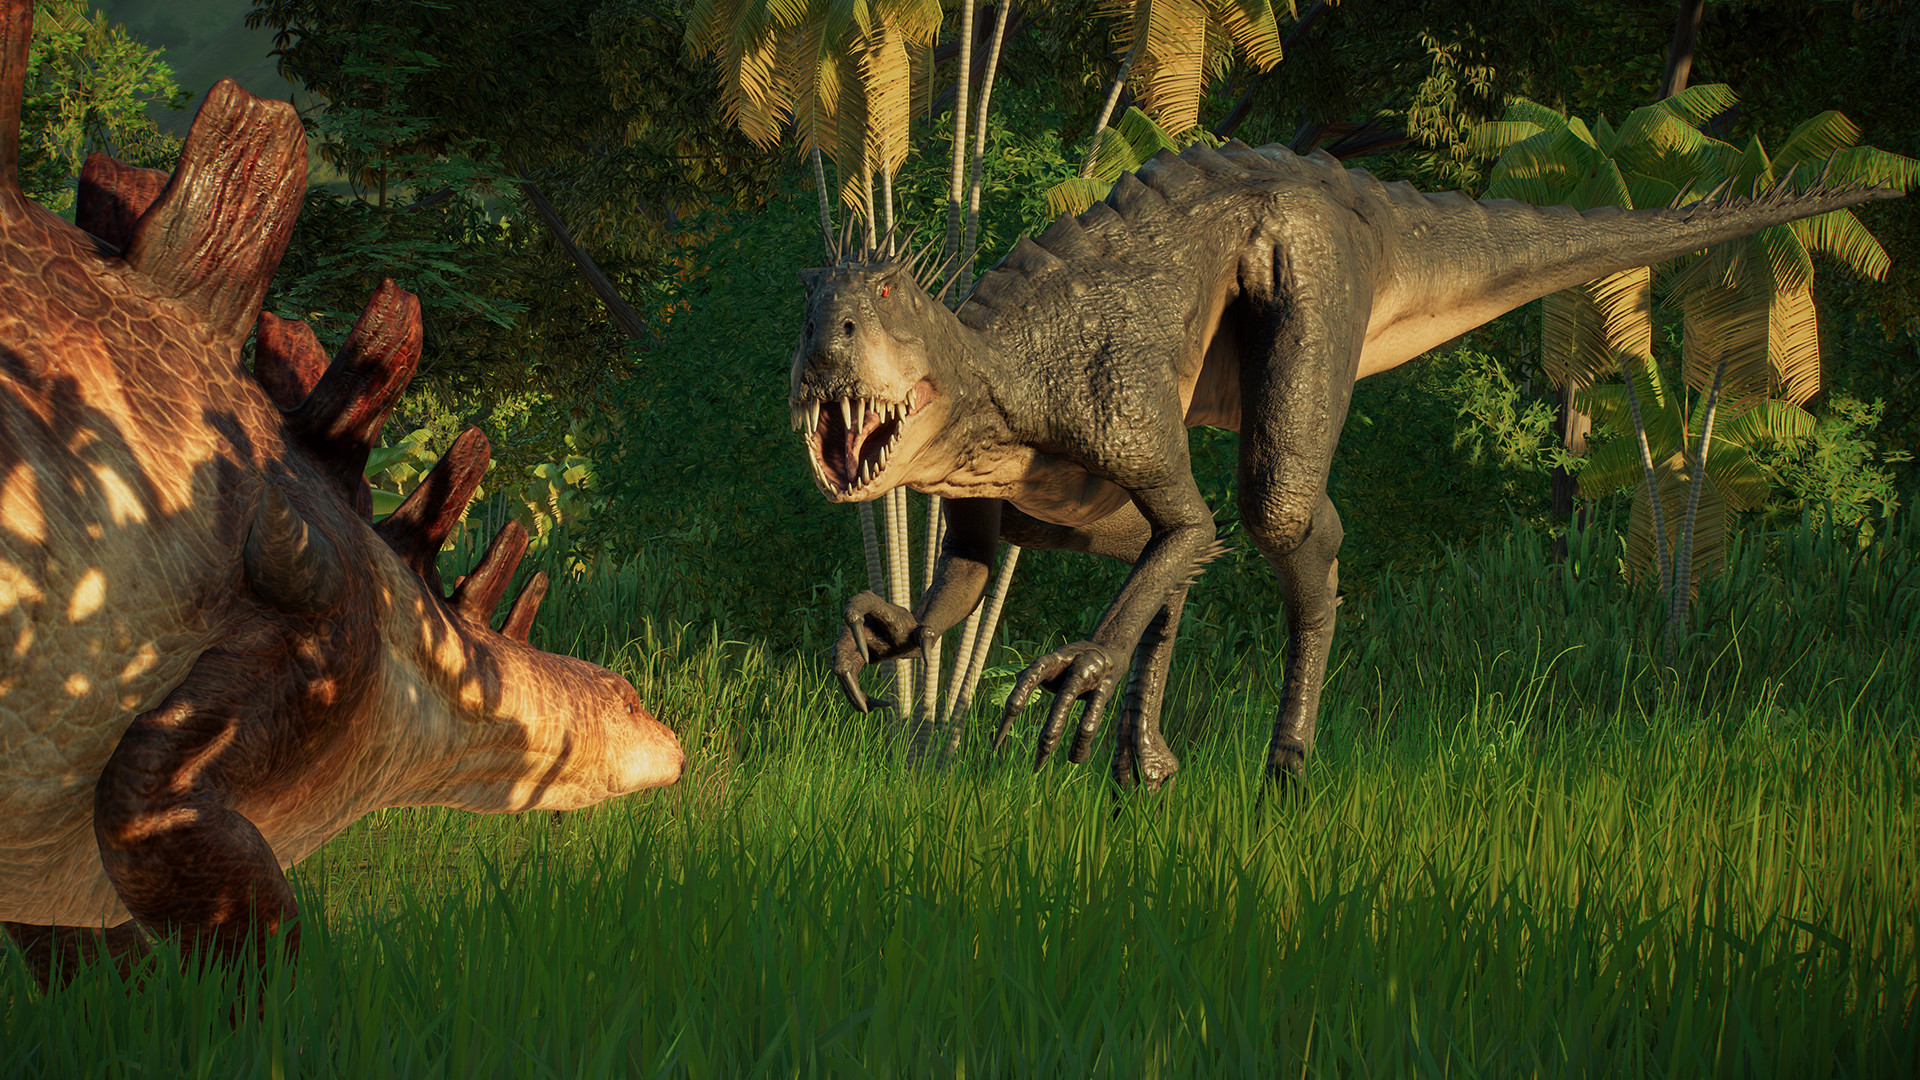 Jurassic World Evolution 2: Camp Cretaceous Dinosaur Pack DLC is now available